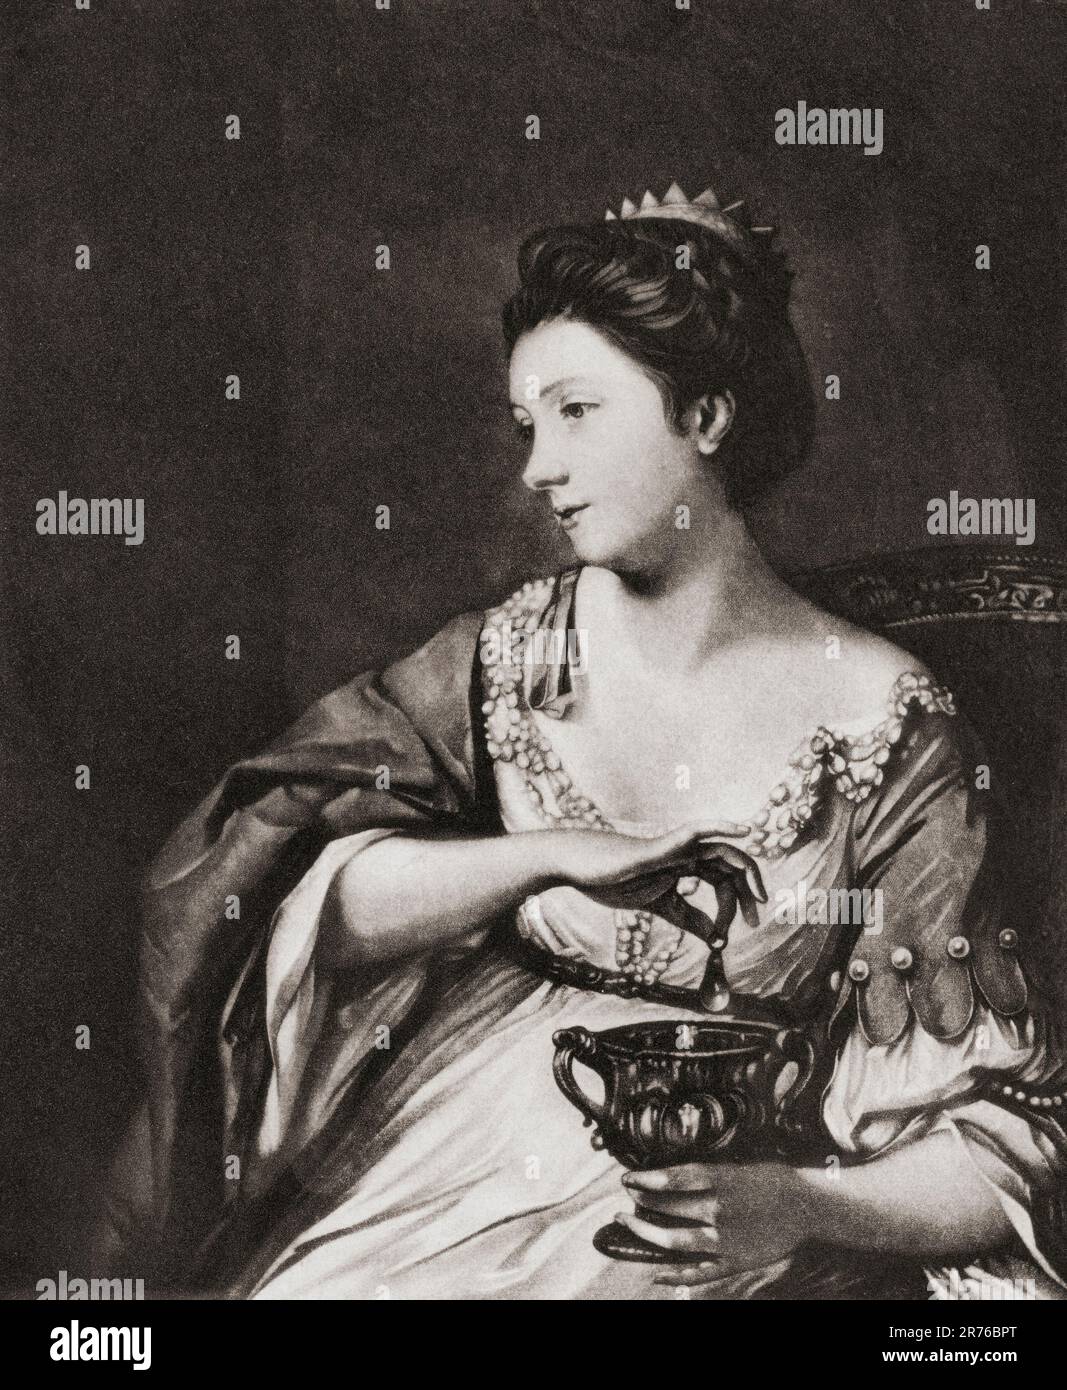 Catherine Maria Fischer, 1741 – 1767, aka Kitty Fisher.  Prominent British courtesan.  After the portrait by Joshua Reynolds, Cleopatra Dissolving the Pearl.  From Mezzotints, published 1904. Stock Photo